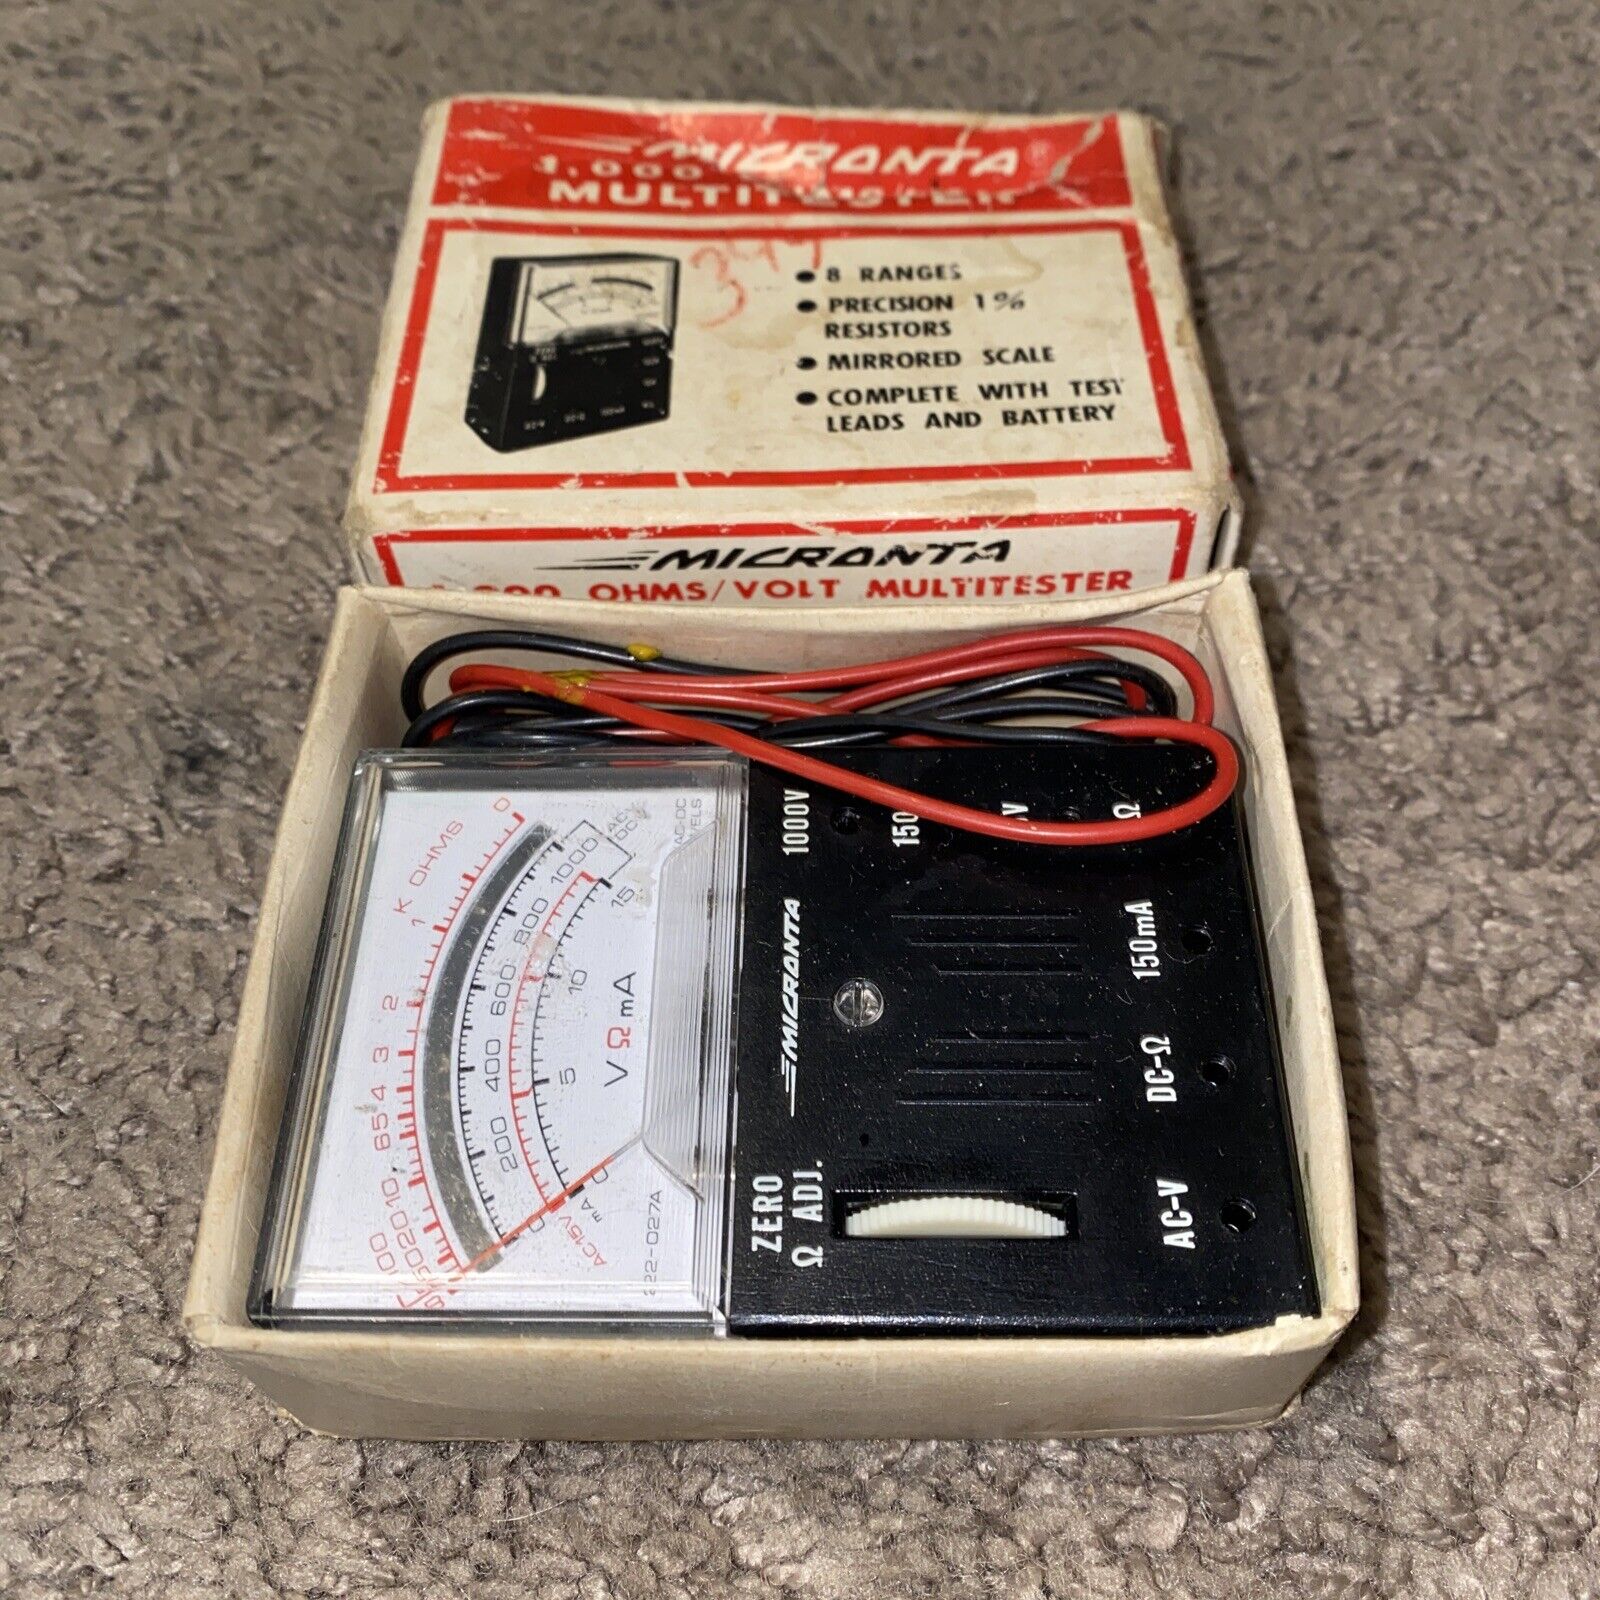 Micronta 1.000 Ohms/Volts Multitester No. 22-027A - New Old Stock Retro Vintage